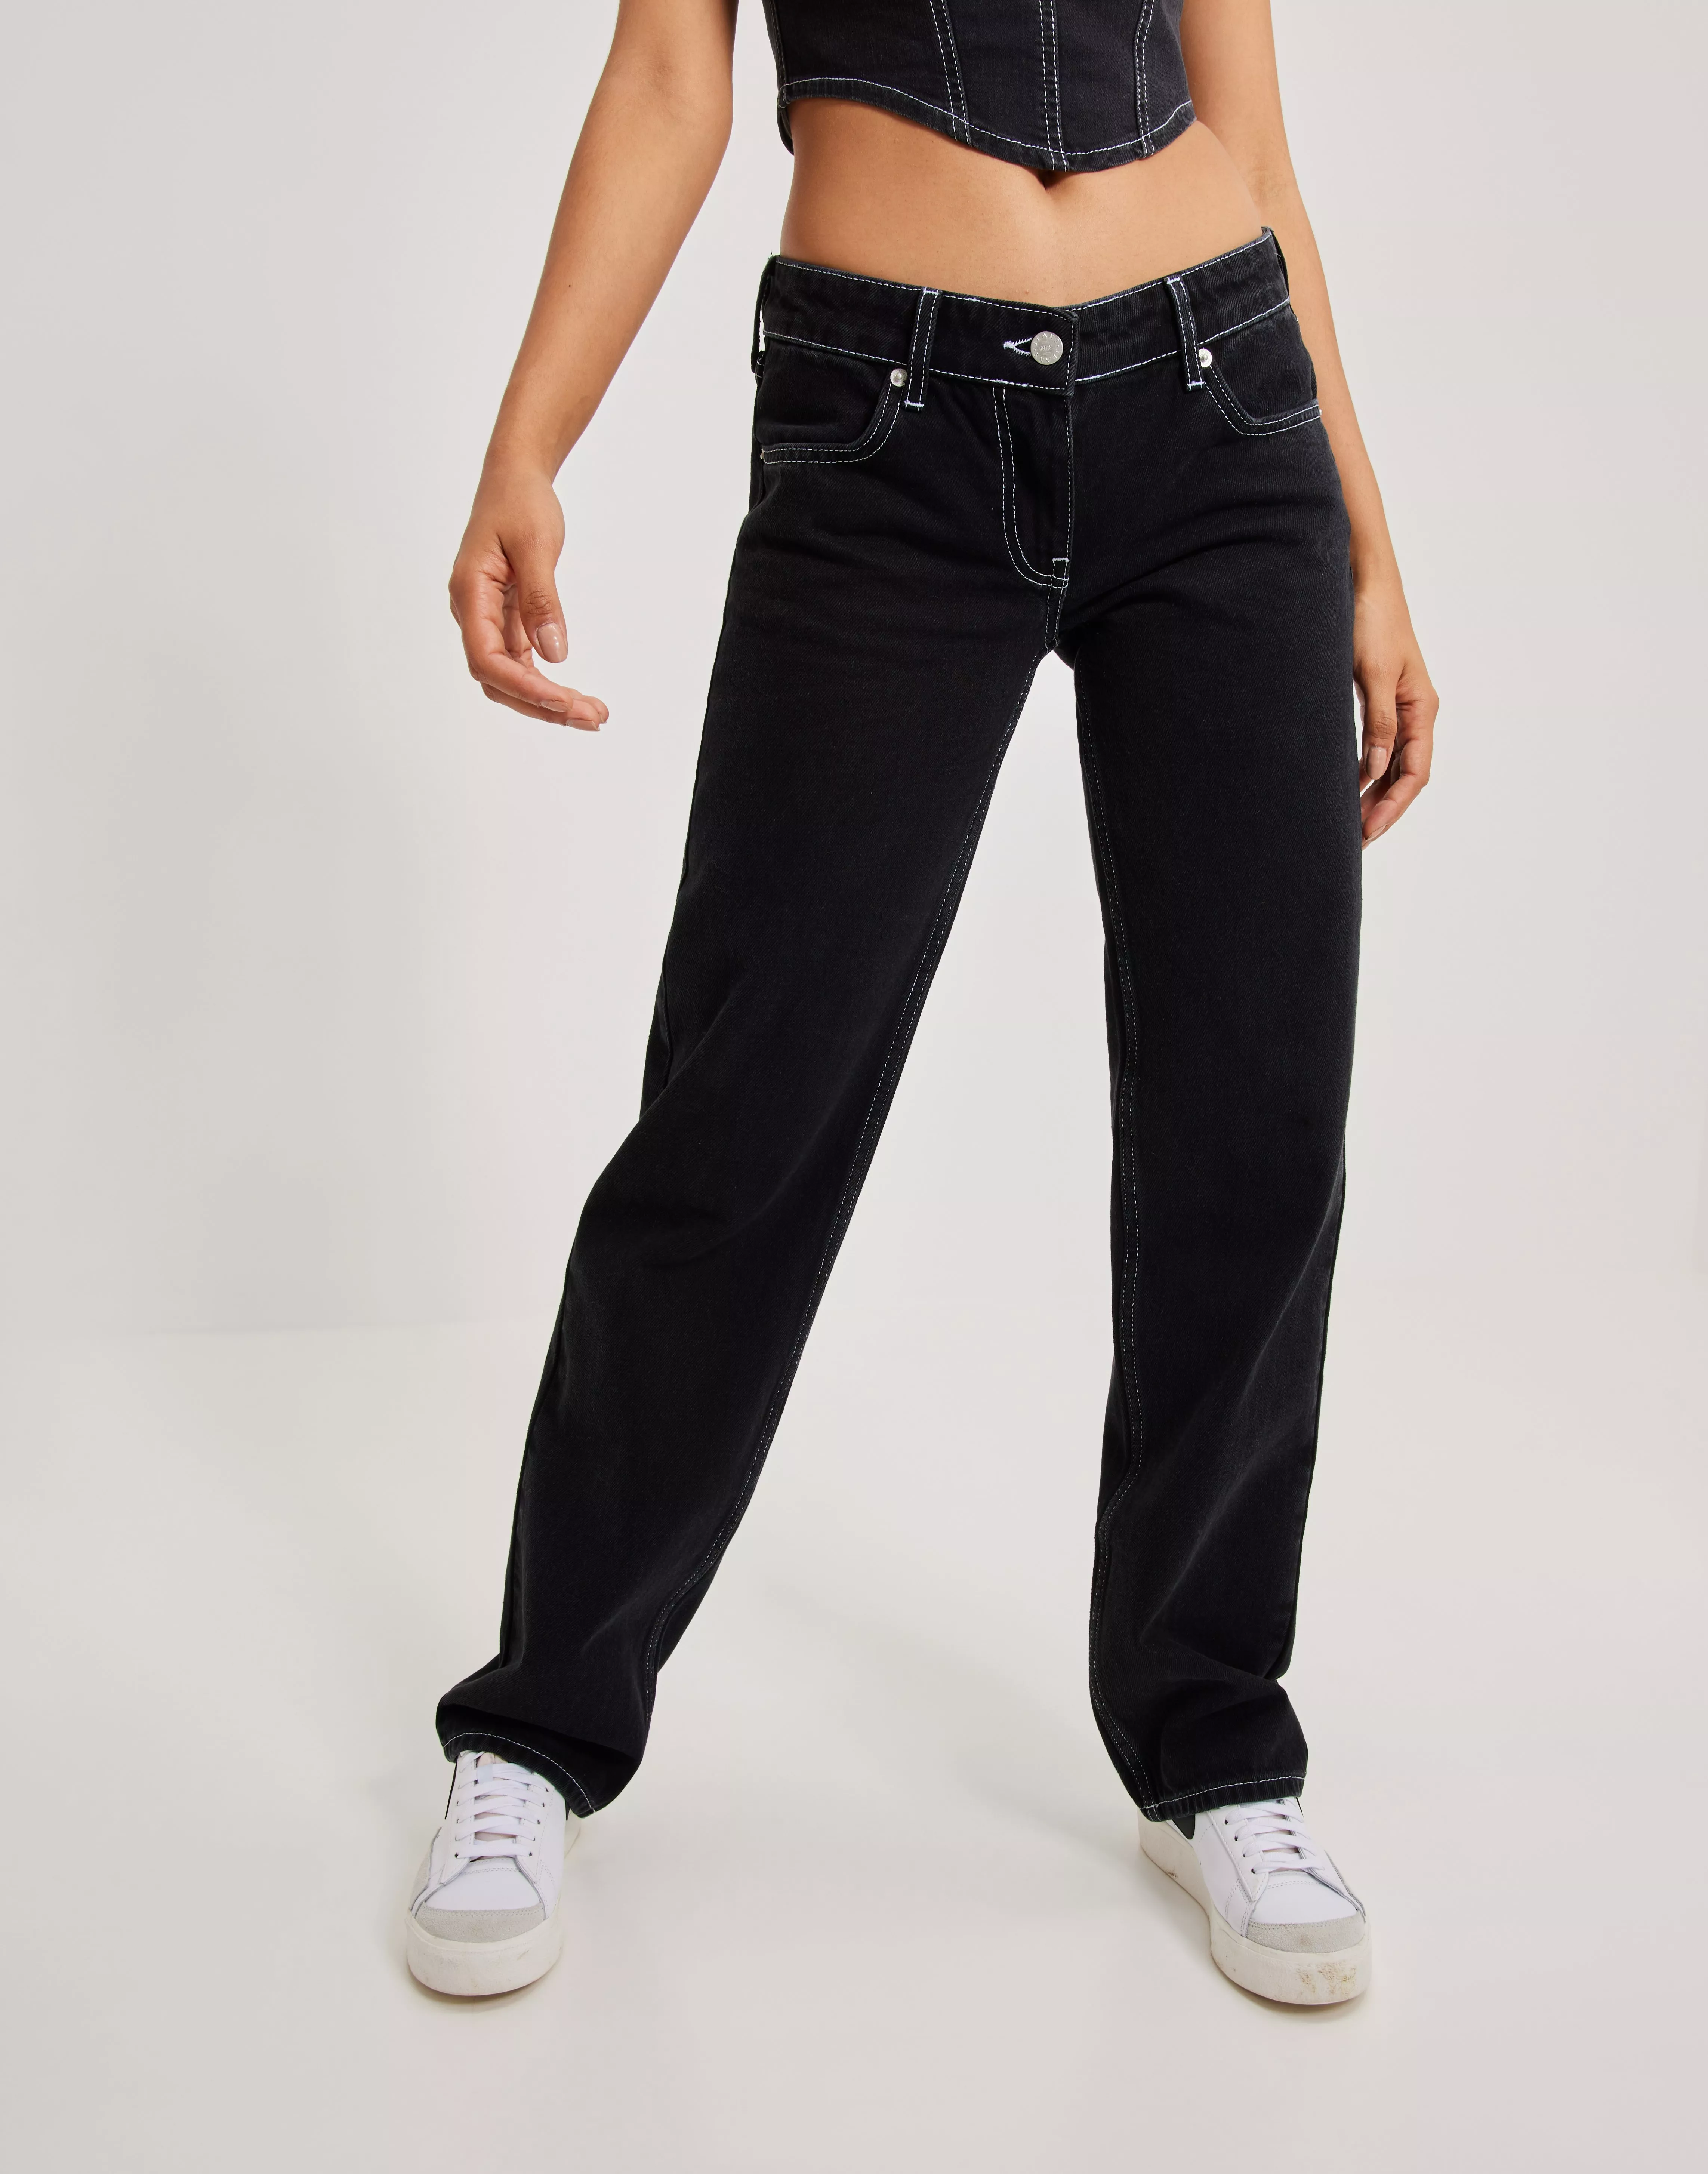 Buy Nelly Low Waist Contrast Seam Jeans - Black | Nelly.com